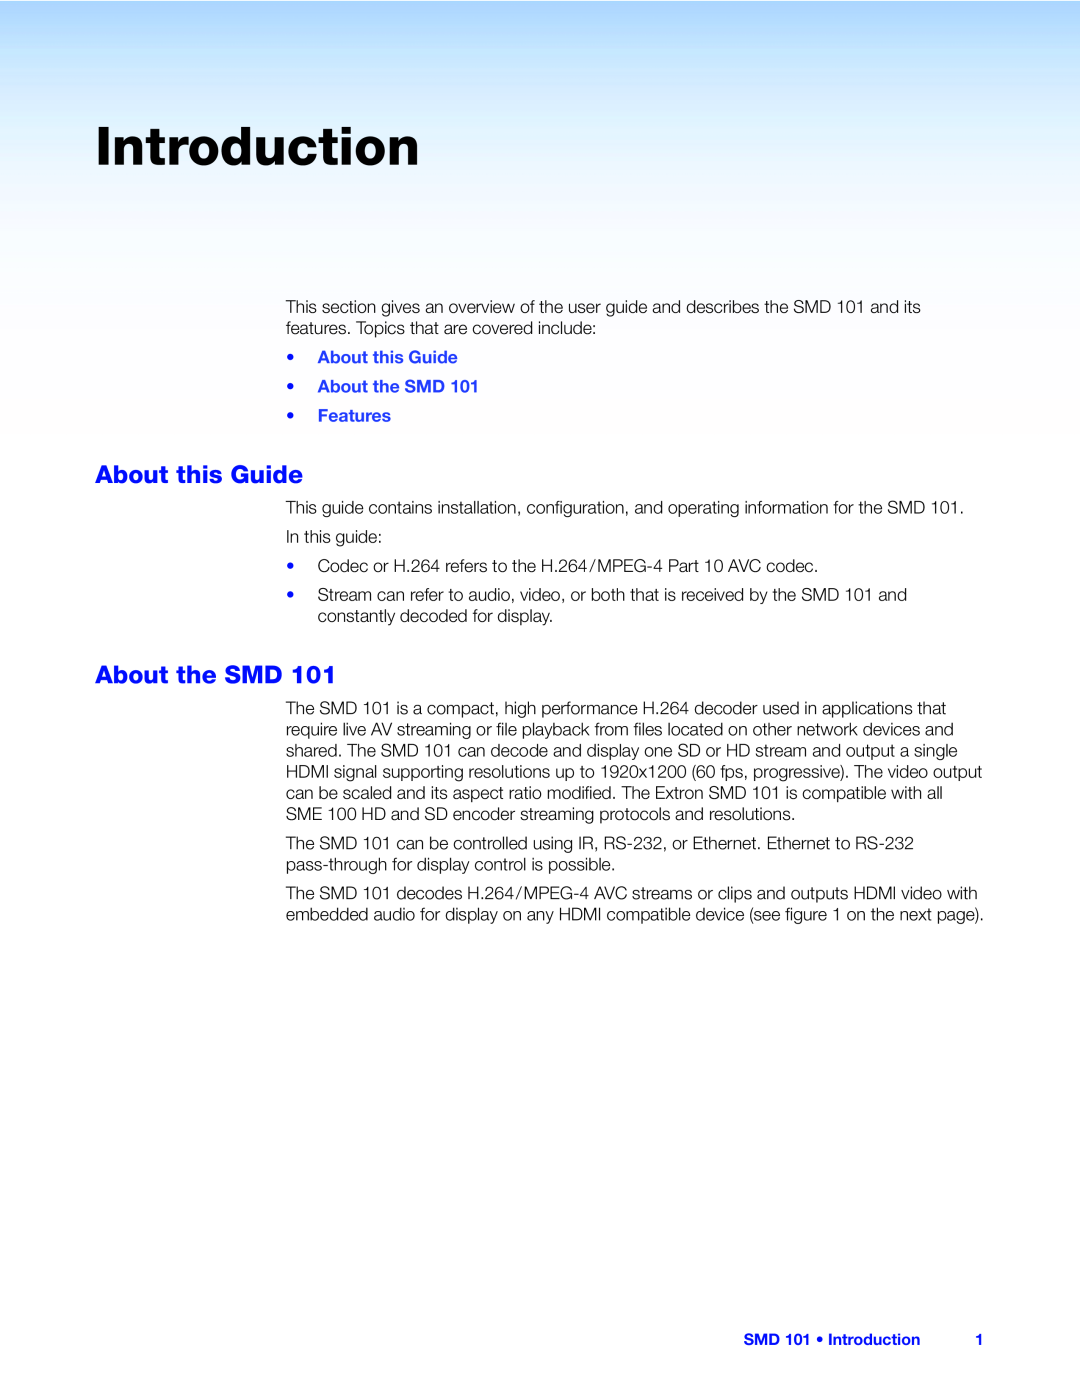 Extron electronic SMD 101 manual Introduction, About this Guide About the SMD Features 